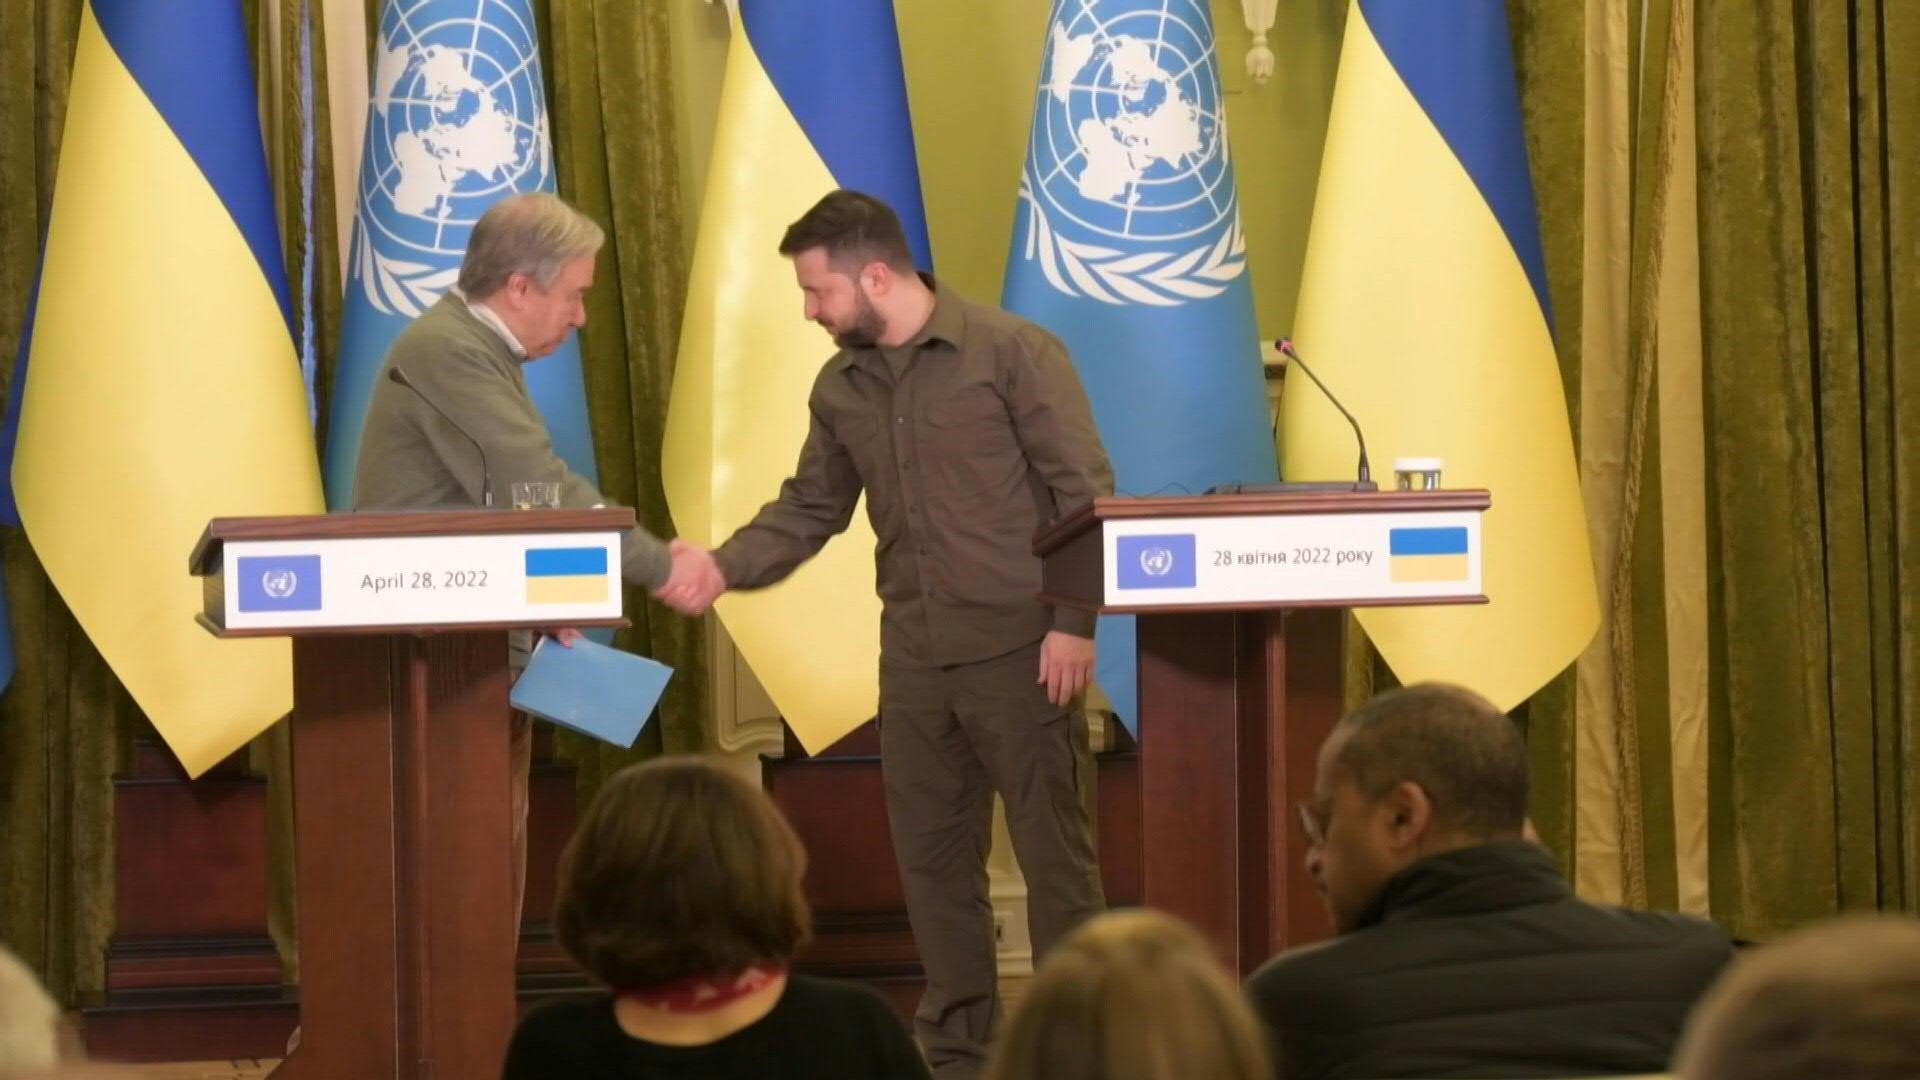 Zelensky and Guterres salute in public antes de concerce a conference in prensa in Kiev, tras a bilateral to accredit the aperture of a corridor humanitario entre Mariupol and Zaporizhia